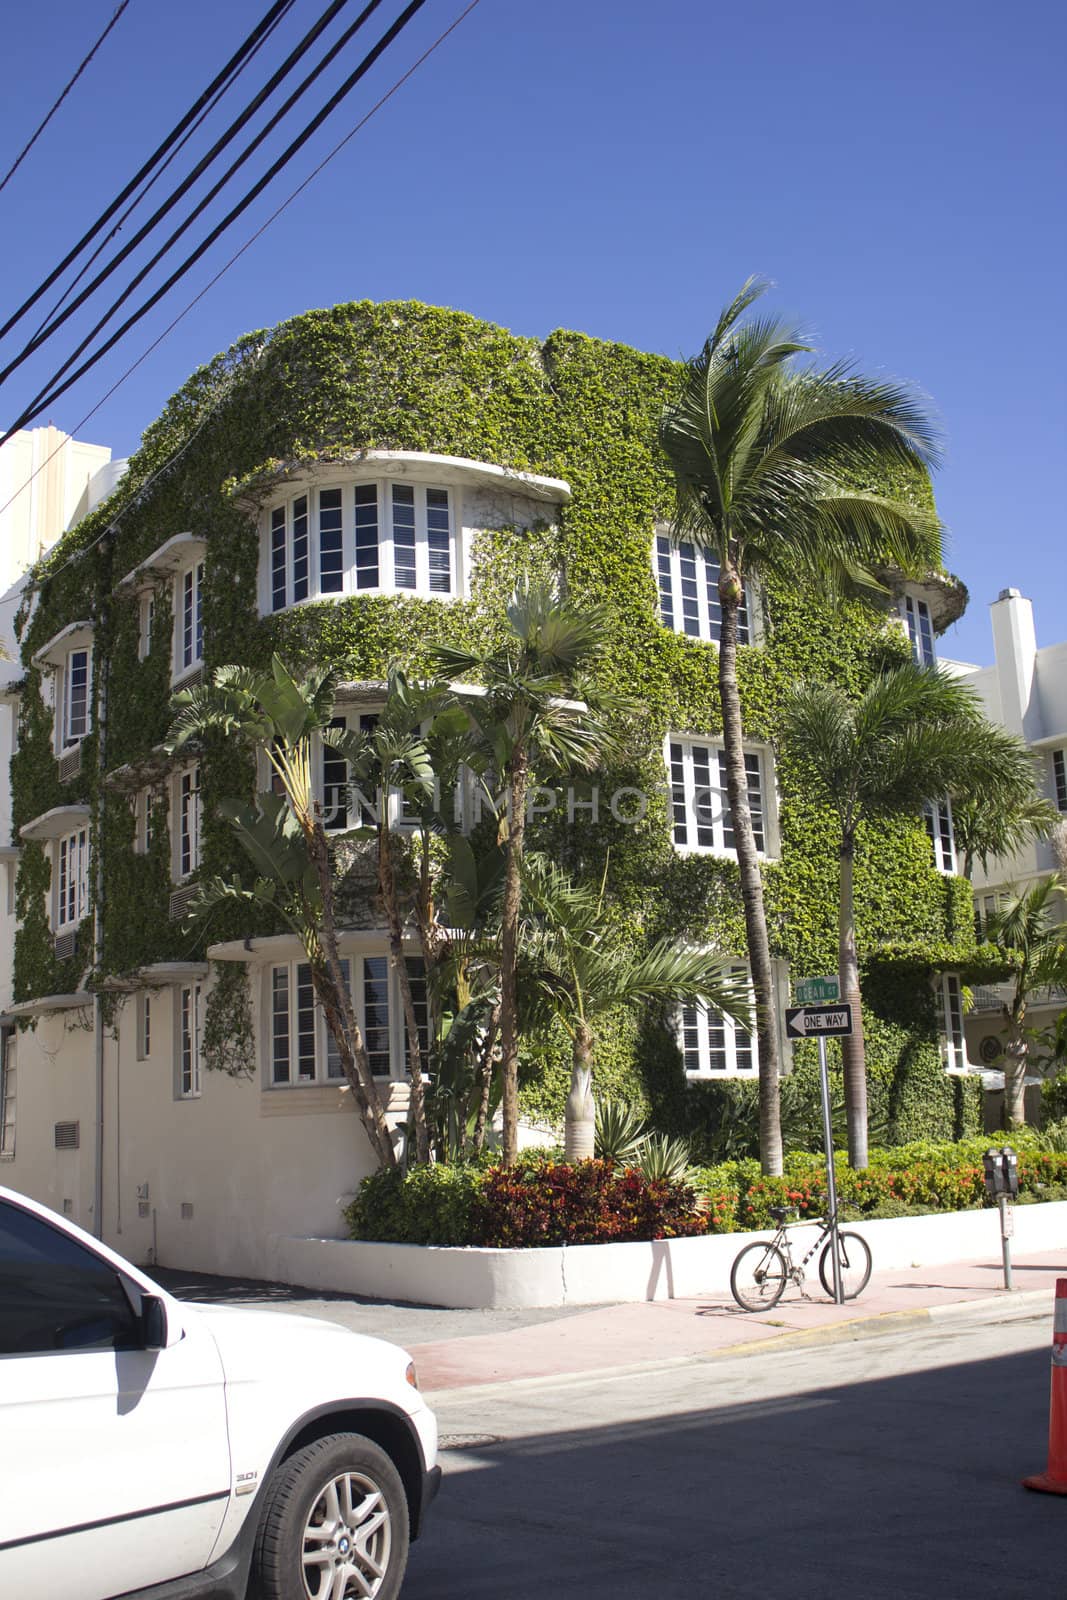 Building in Miami Florida by jeremywhat